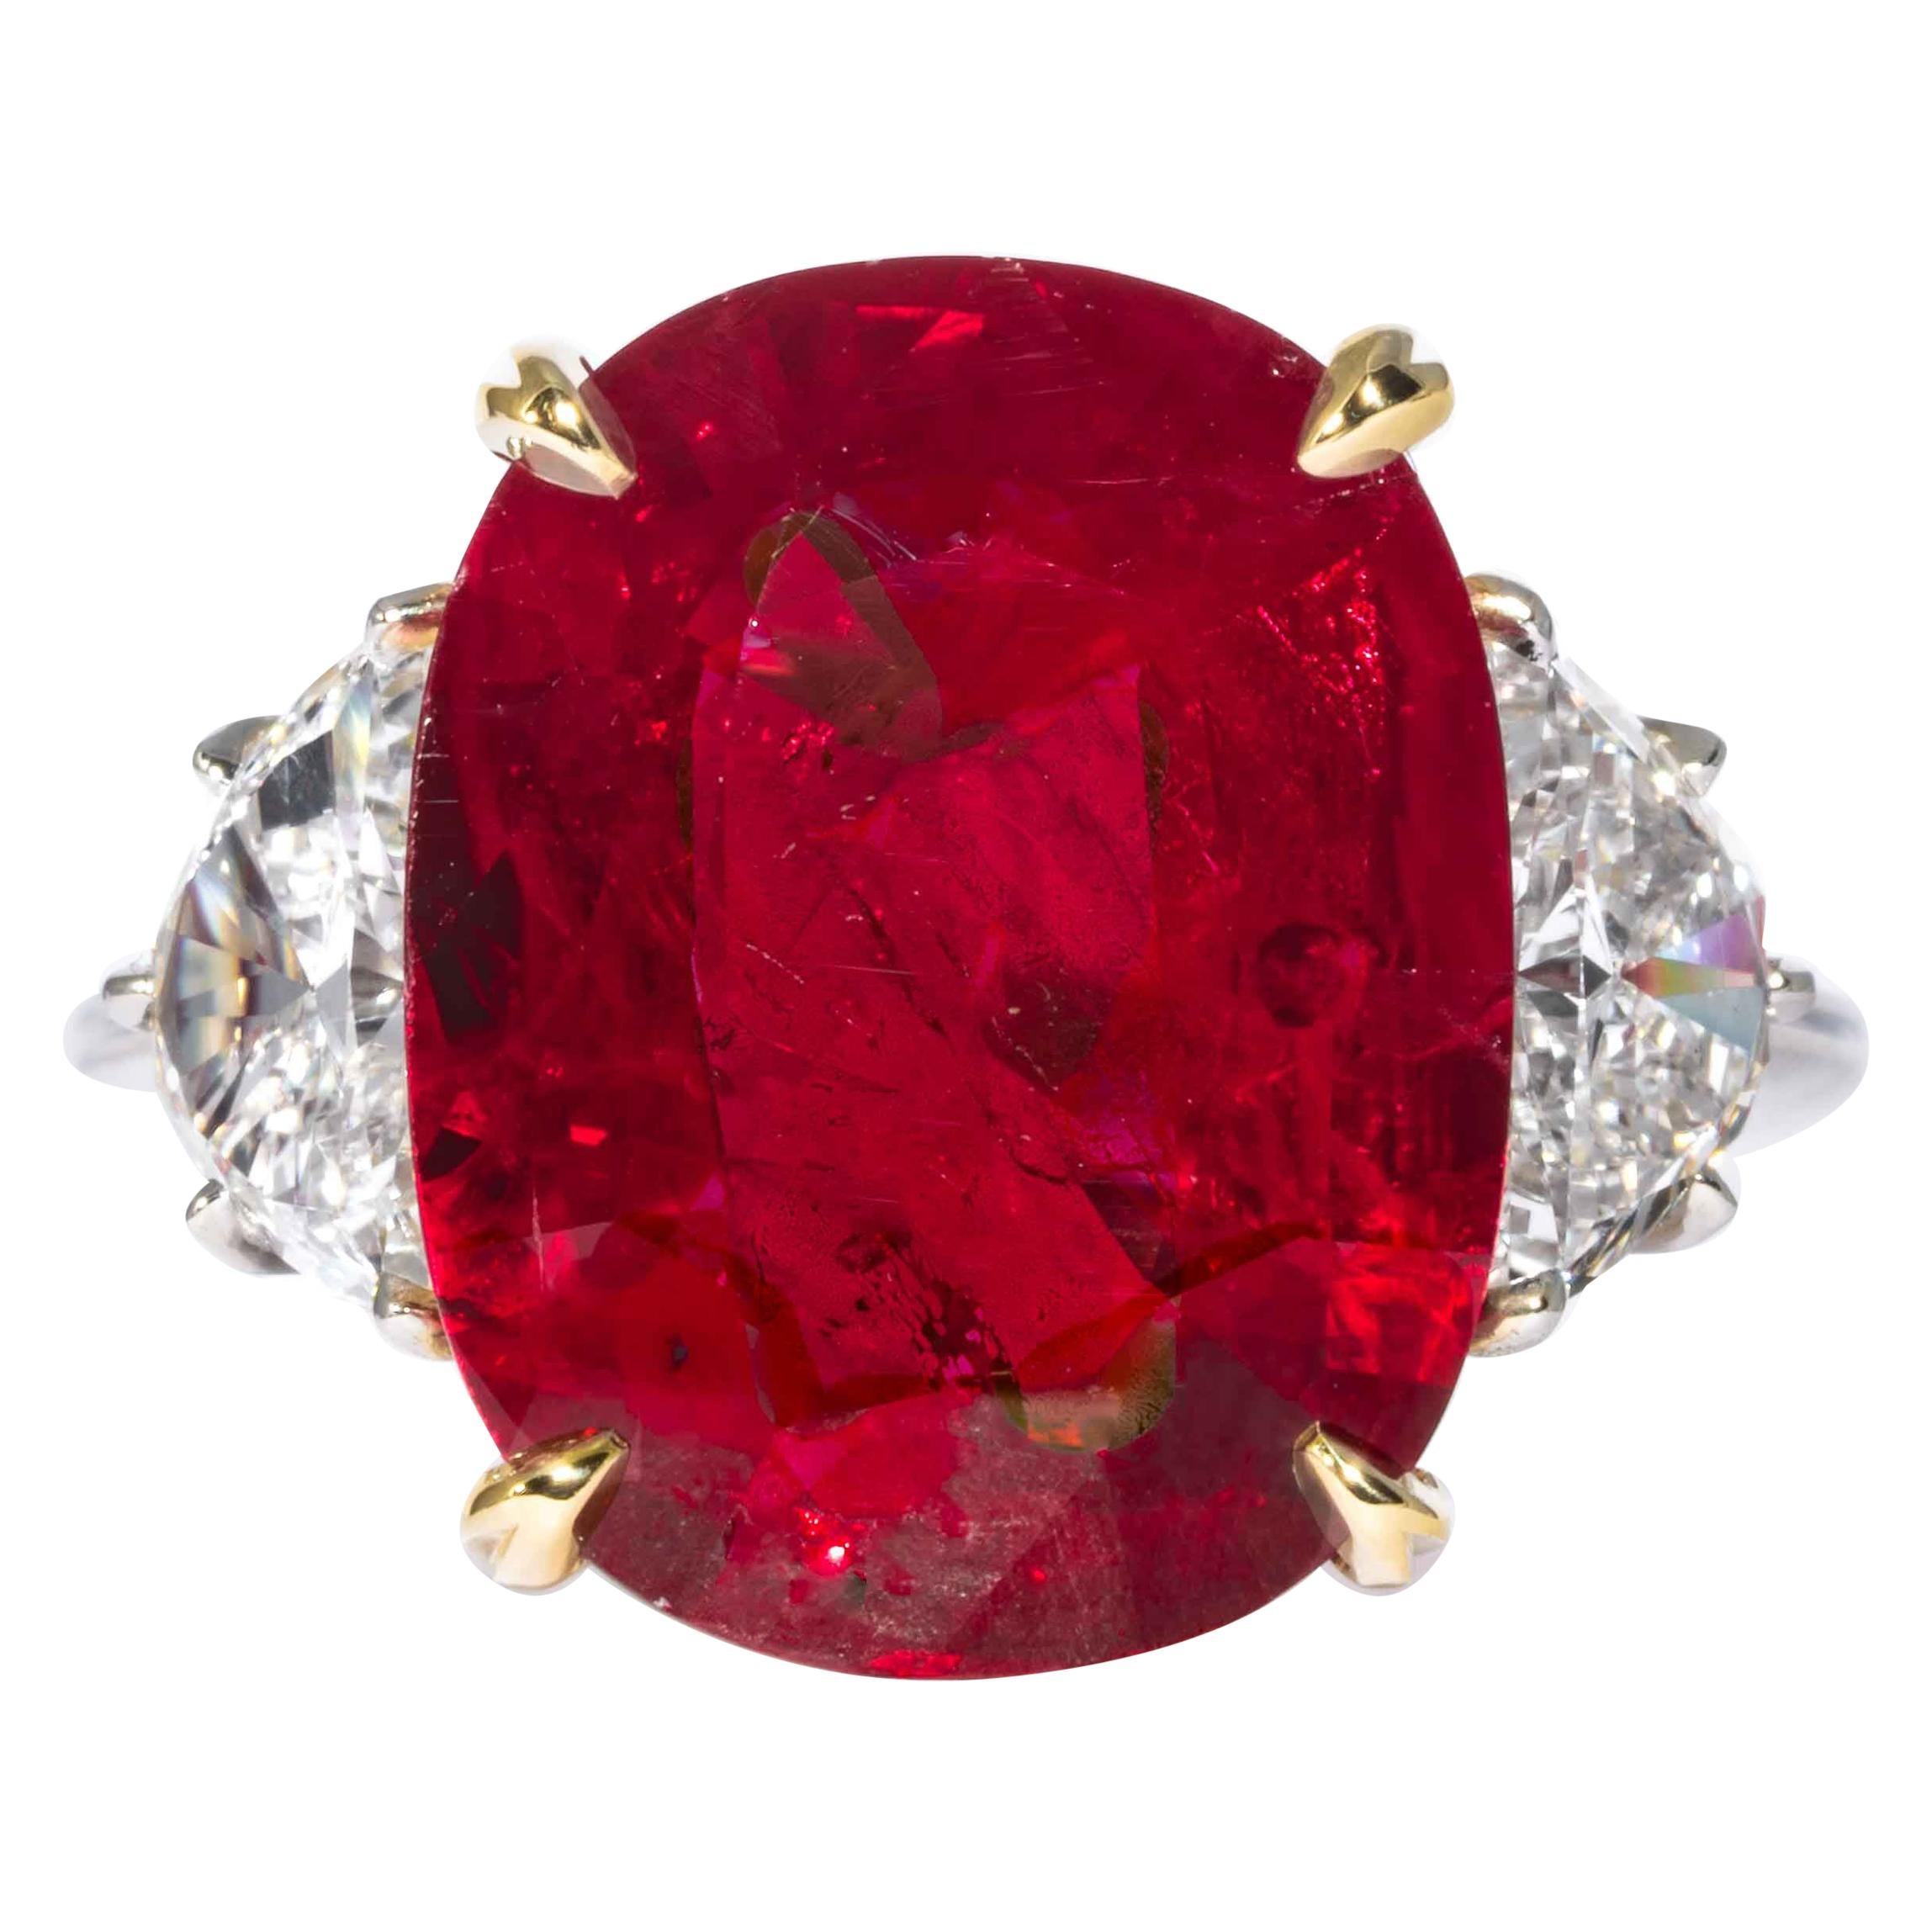 Shreve, Crump & Low 10.24 Carat "Royal Red" Ruby and Diamond 3-Stone Ring